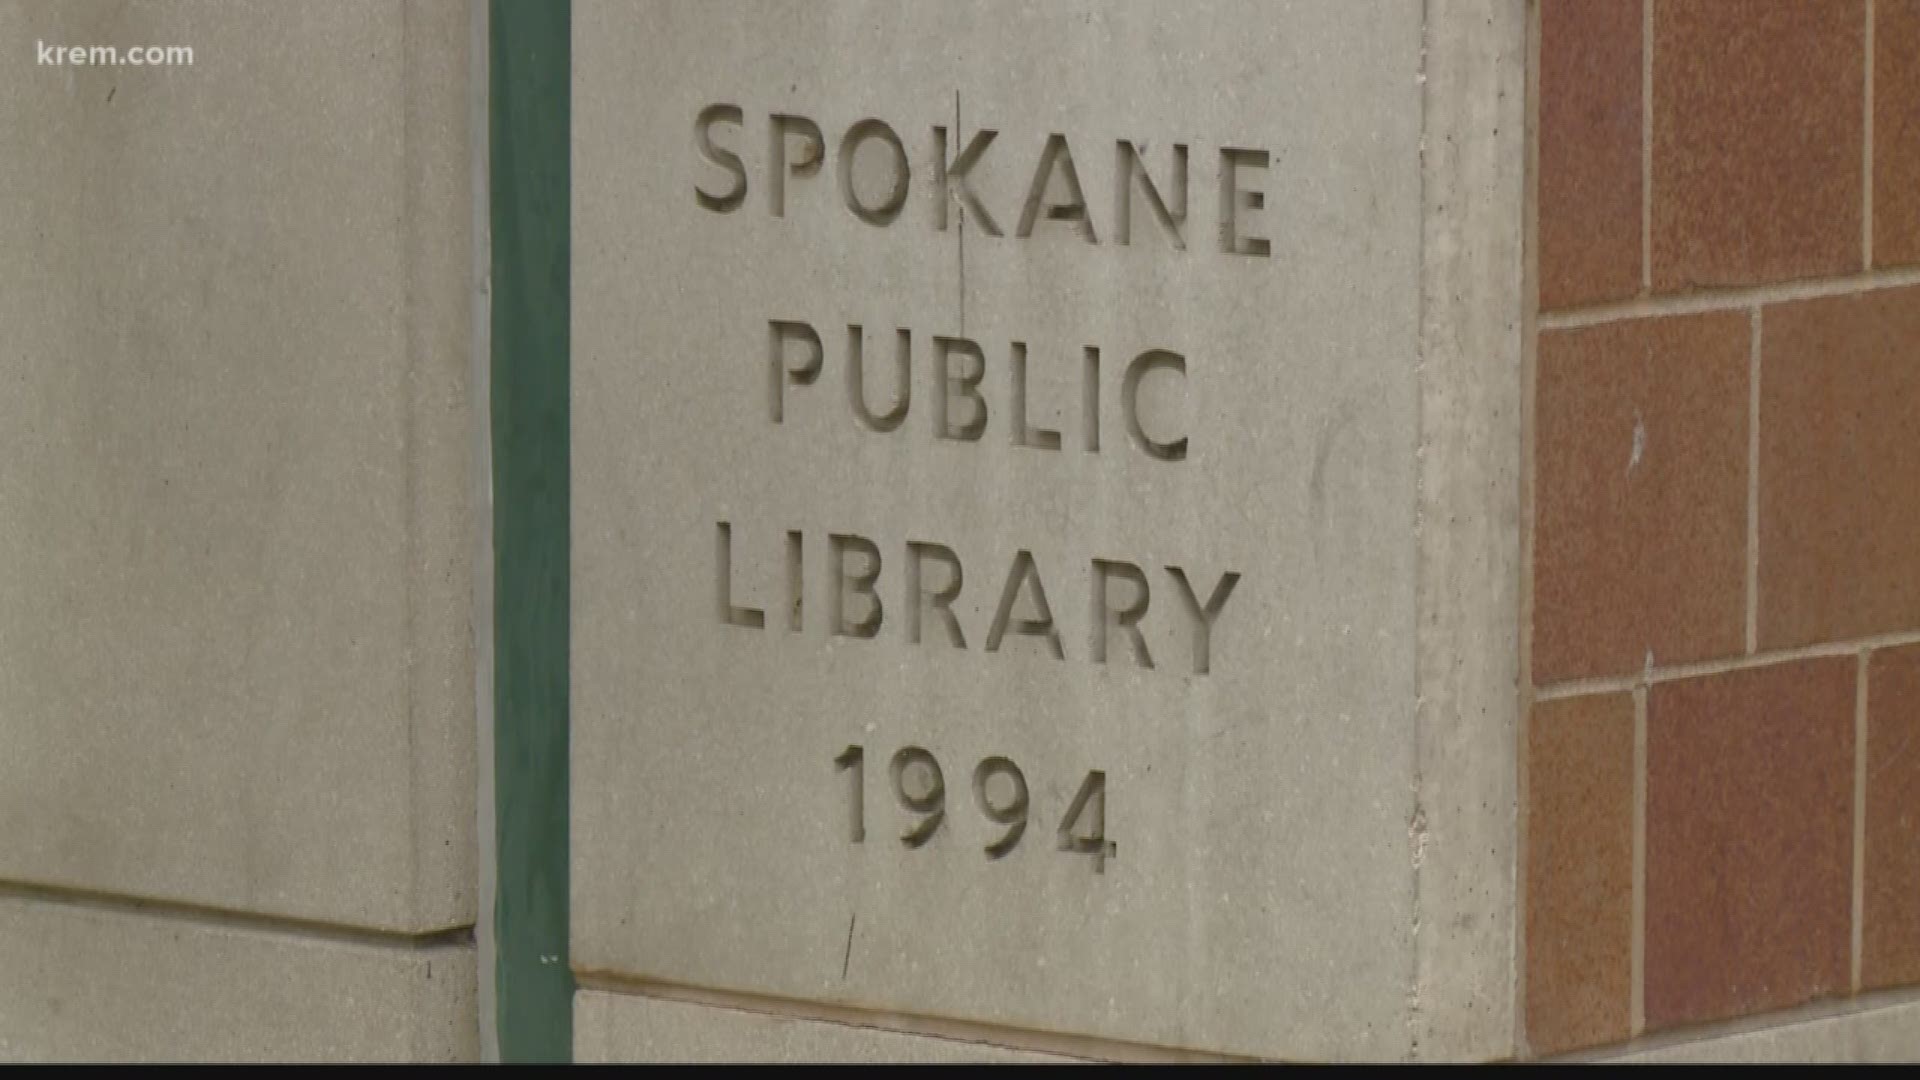 It's an effort between the organization and the city of Spokane to ensure social distancing is practiced for people experiencing homelessness.